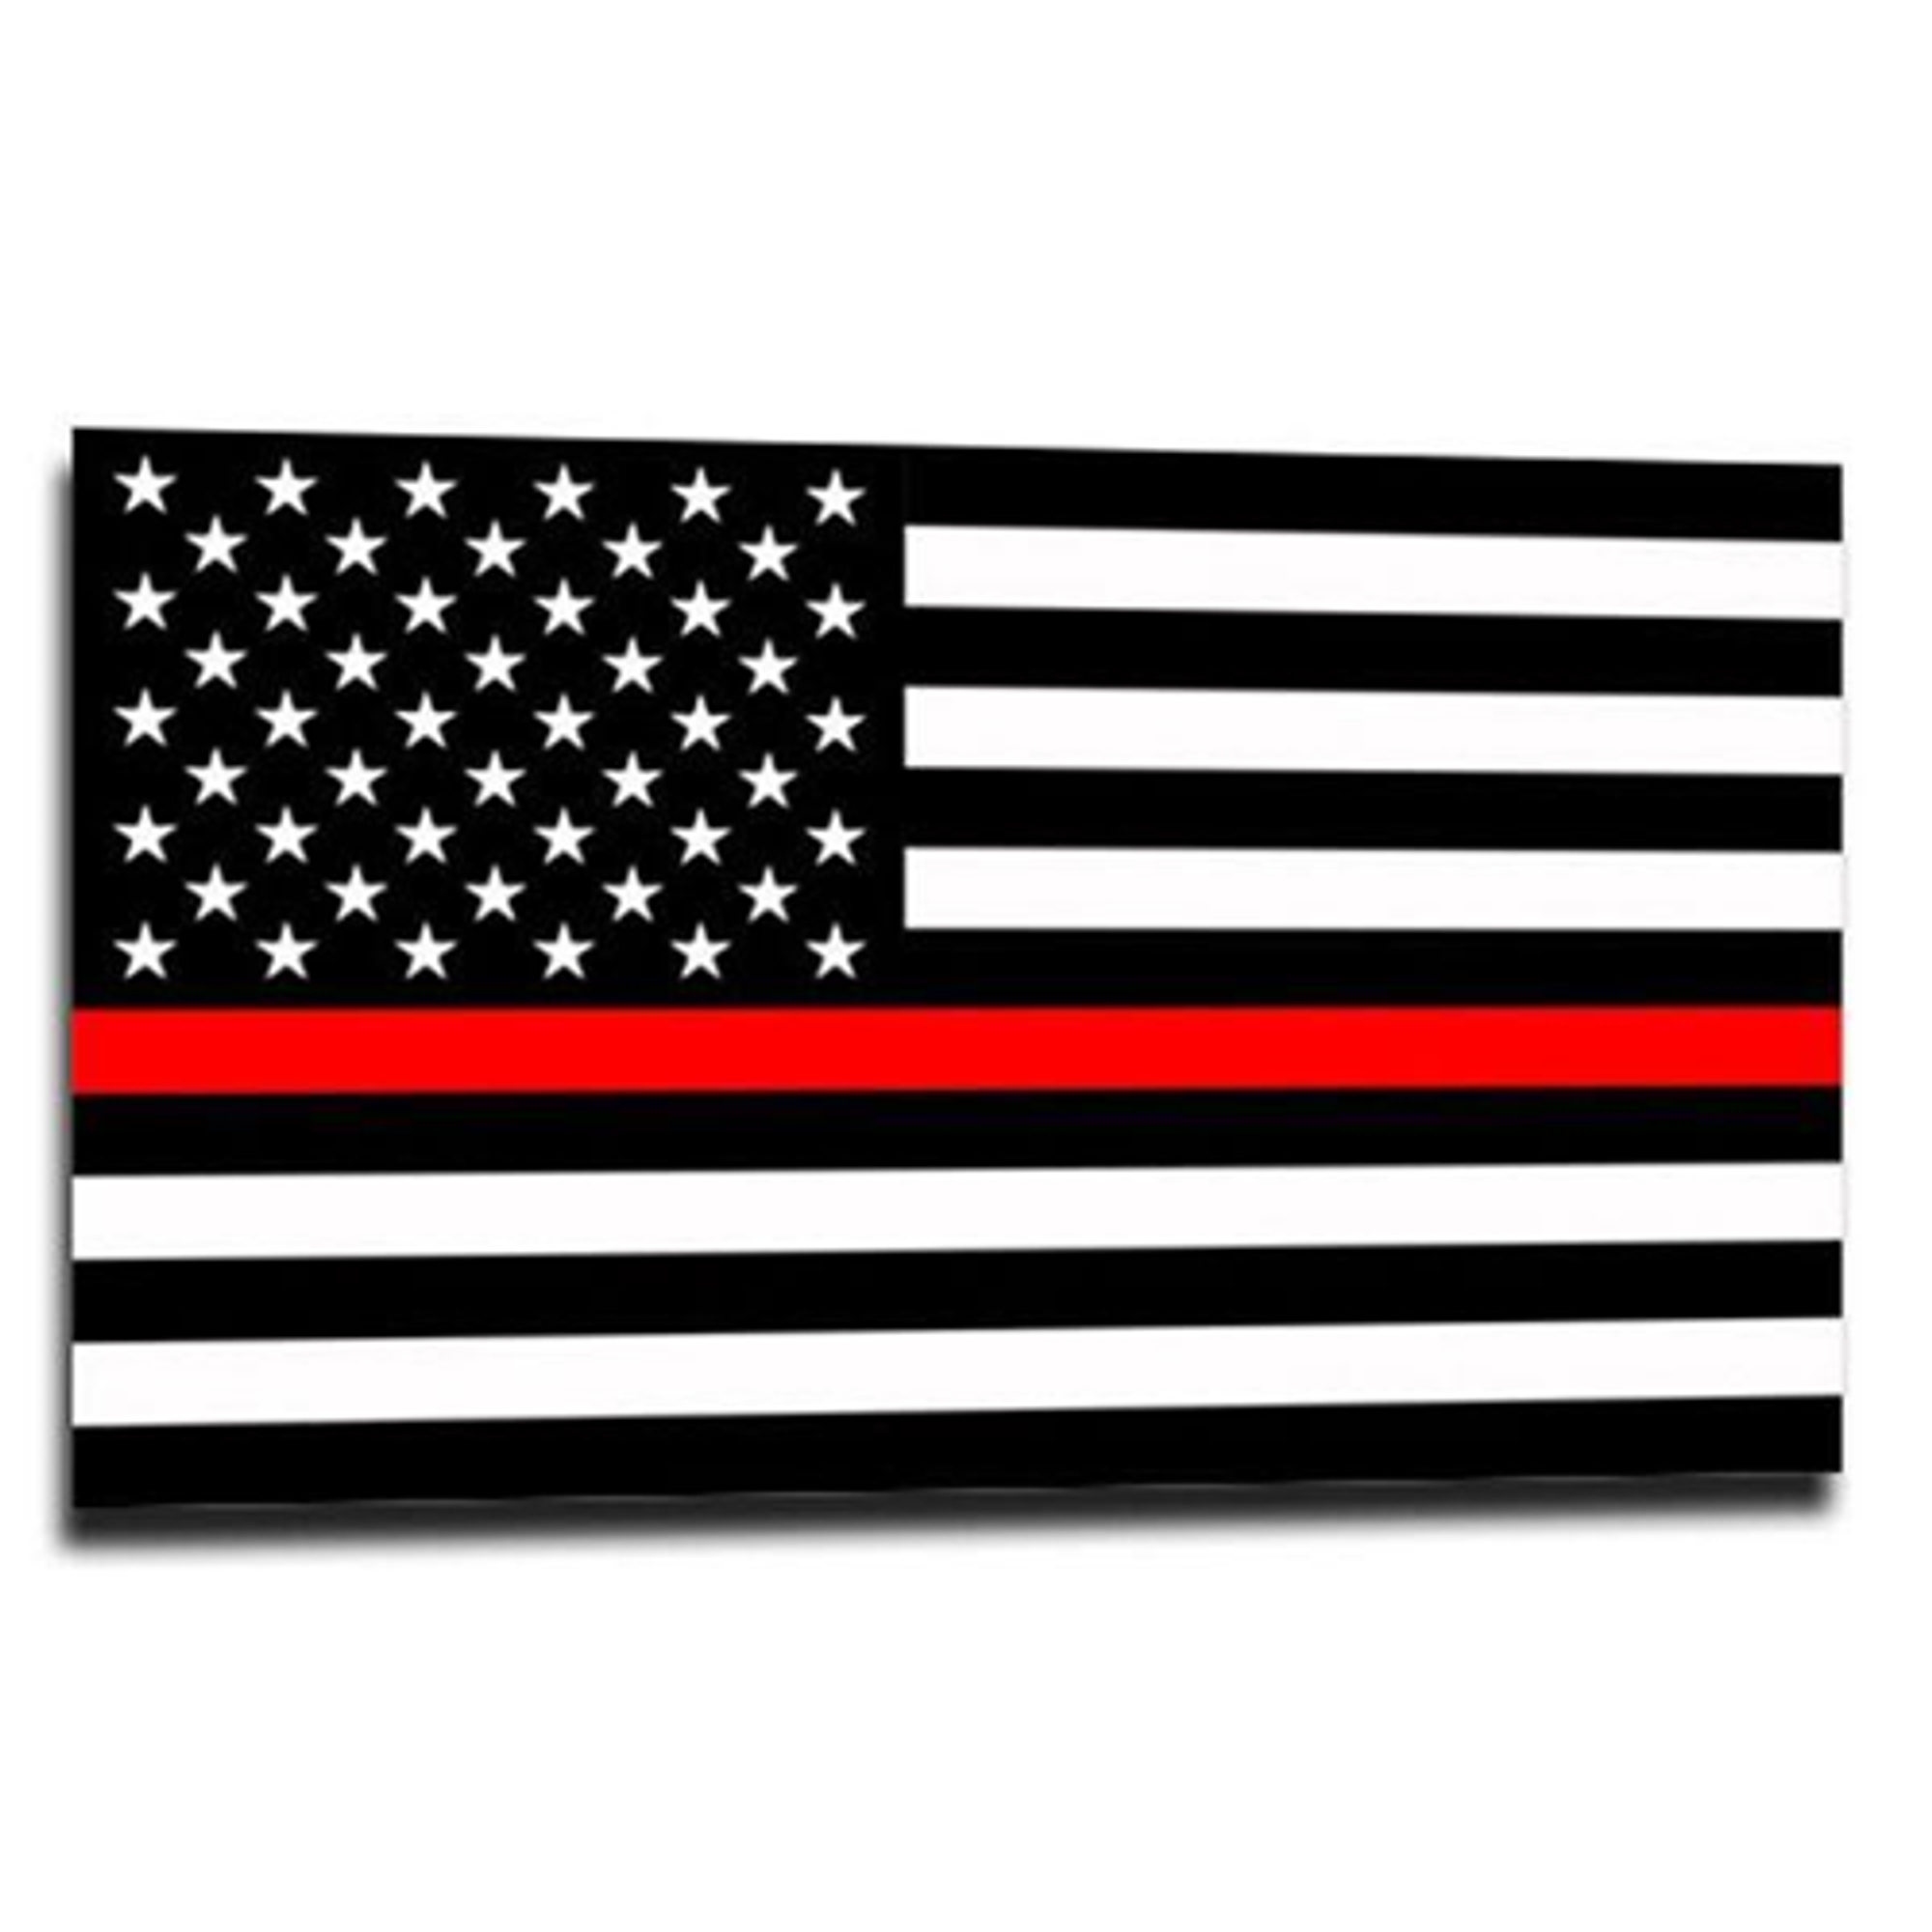 Thin Red Line American Flag Sticker, 2.5 X 4.5 Inches